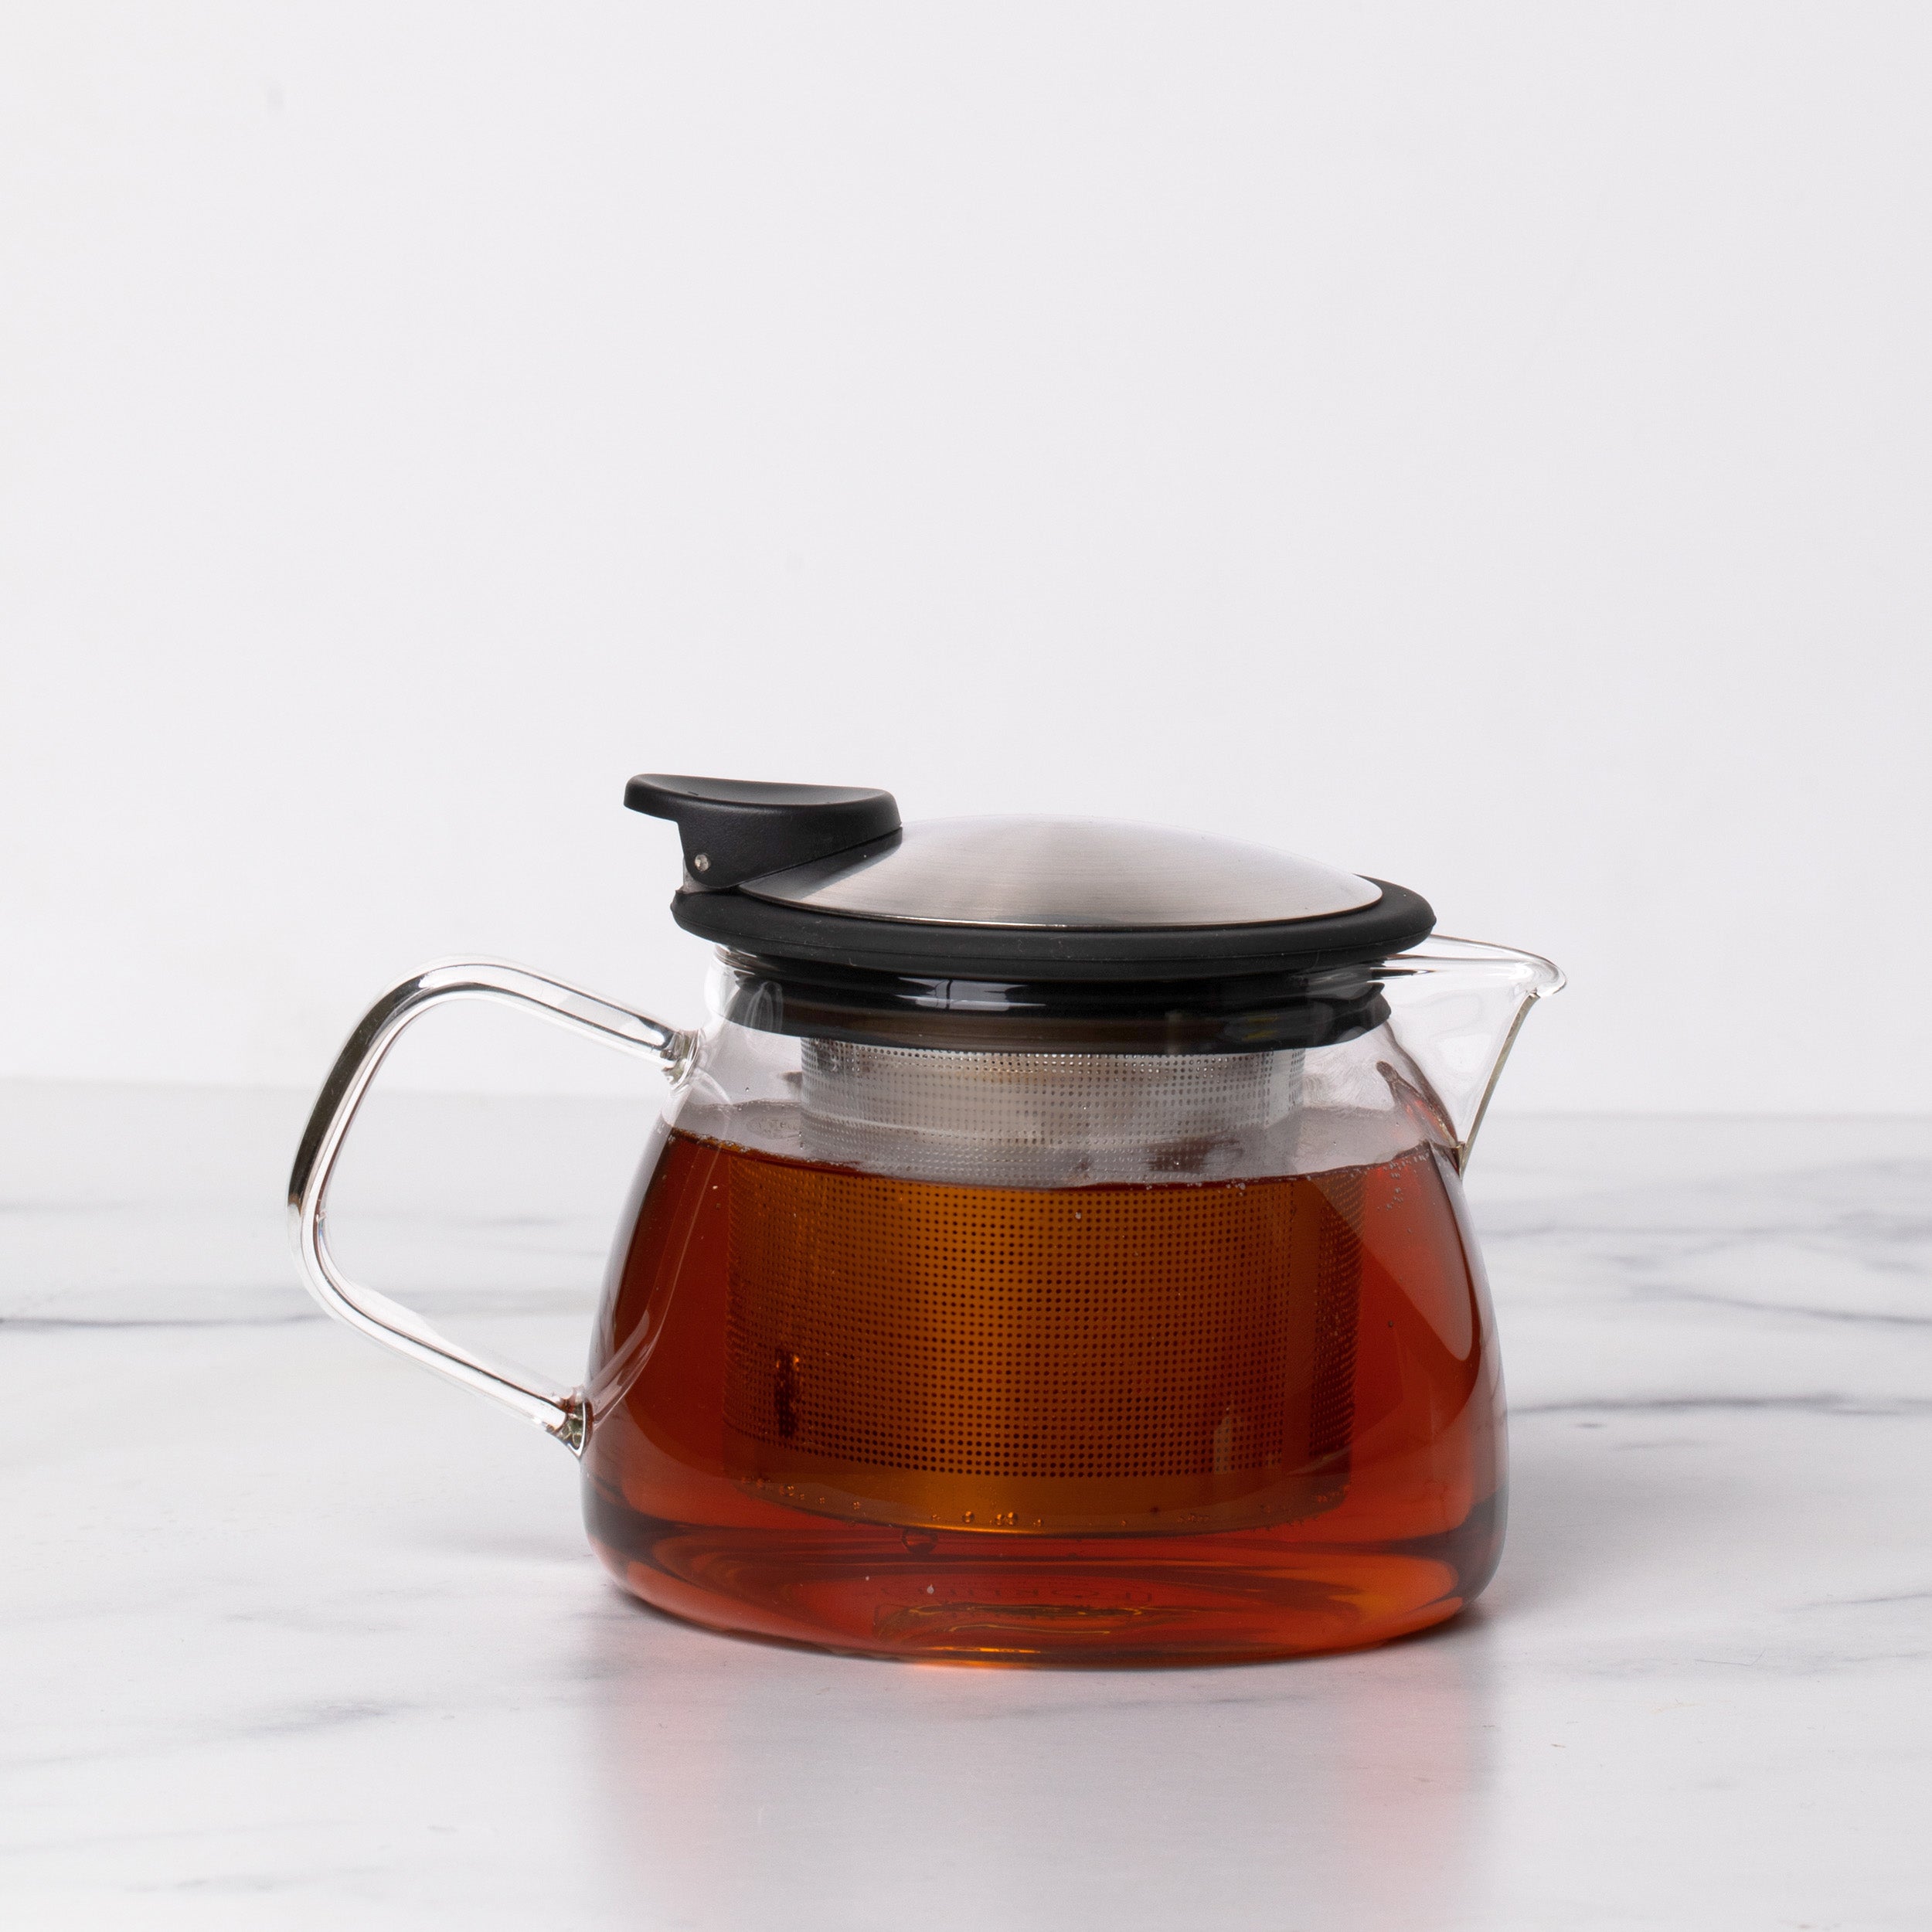 Glass teapot with stainless steel and black lid with spout and handle filled with amber colored tea.